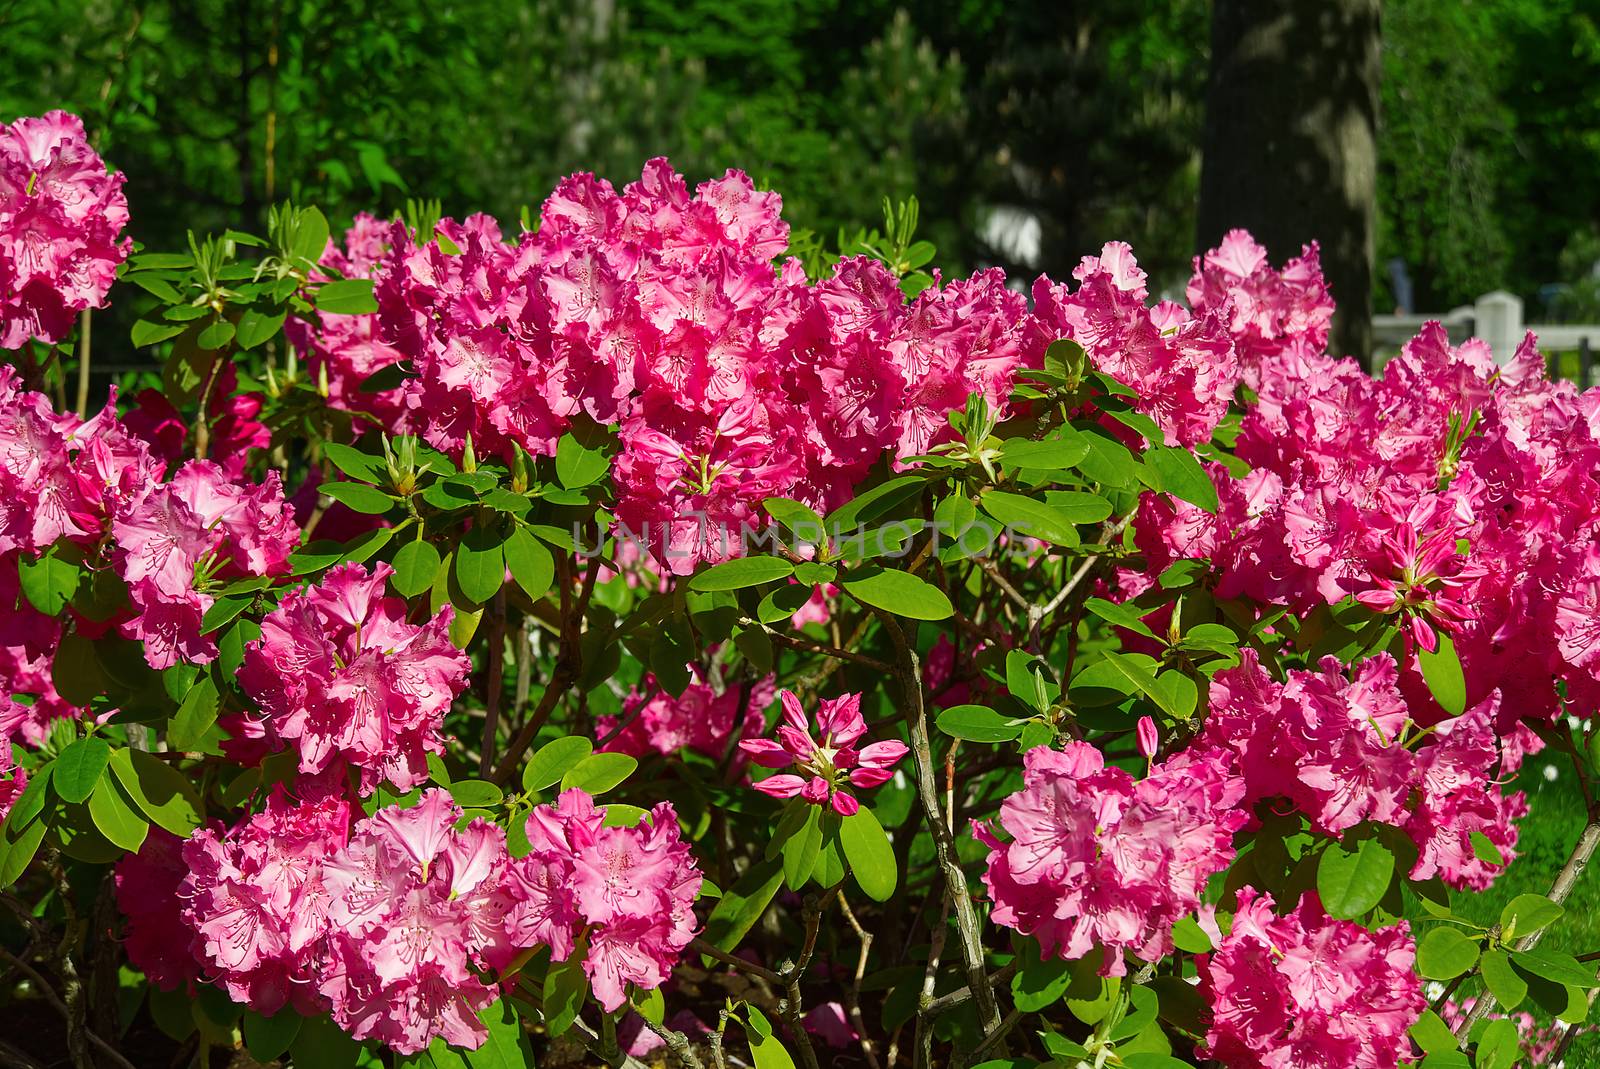 Rhododendron blooming flowers in the spring garden. Pacific rhododendron or California rosebay evergreen shrub. Beautiful pink Rhododendron close up by PhotoTime